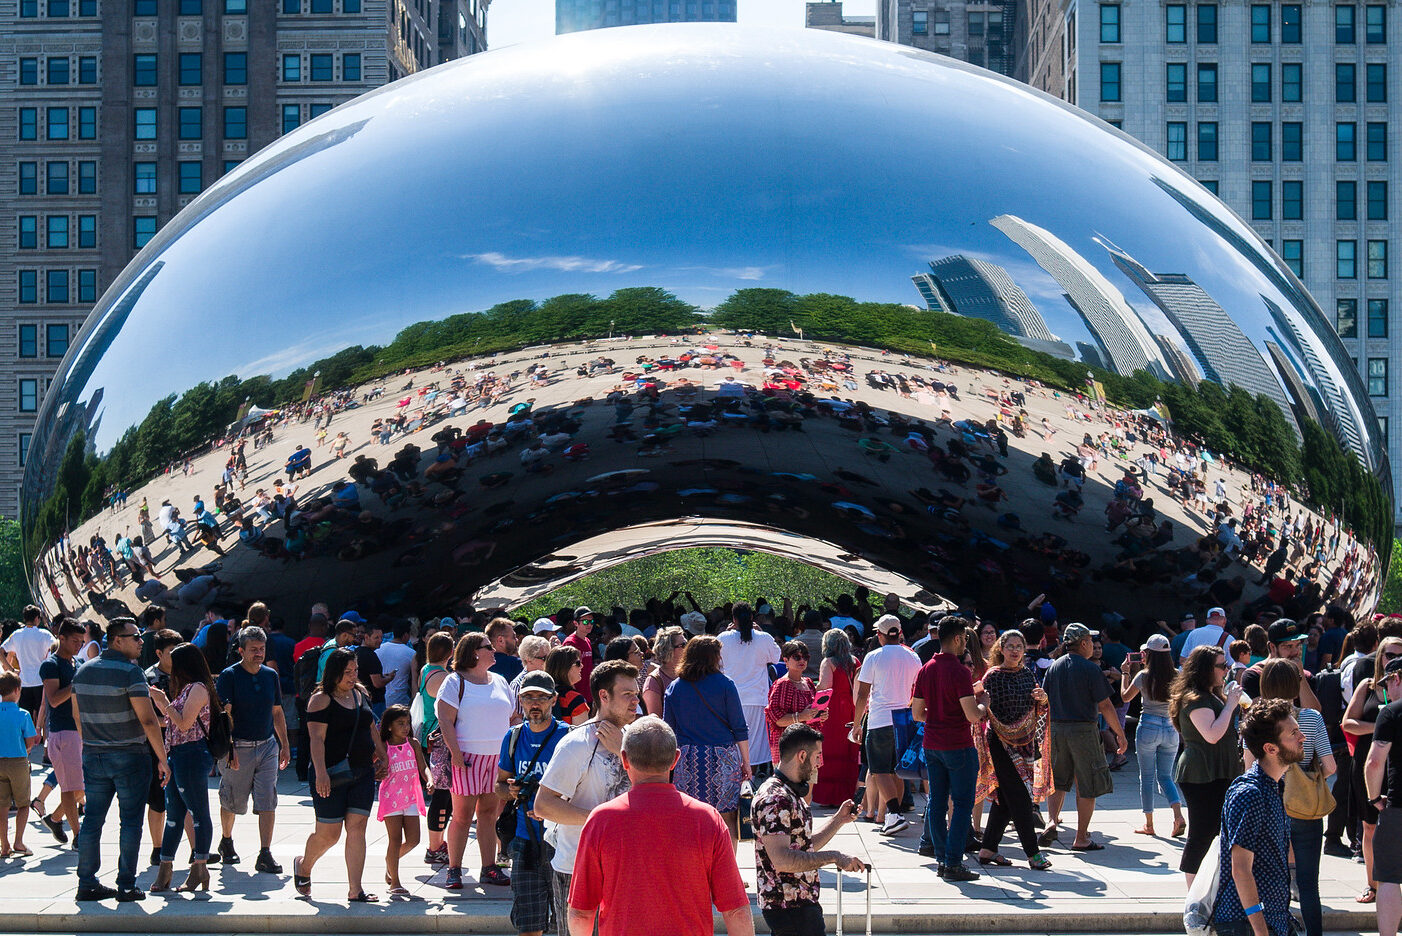 Chicago has seen a boom in visitors this month thanks a series of major events the city has hosted.